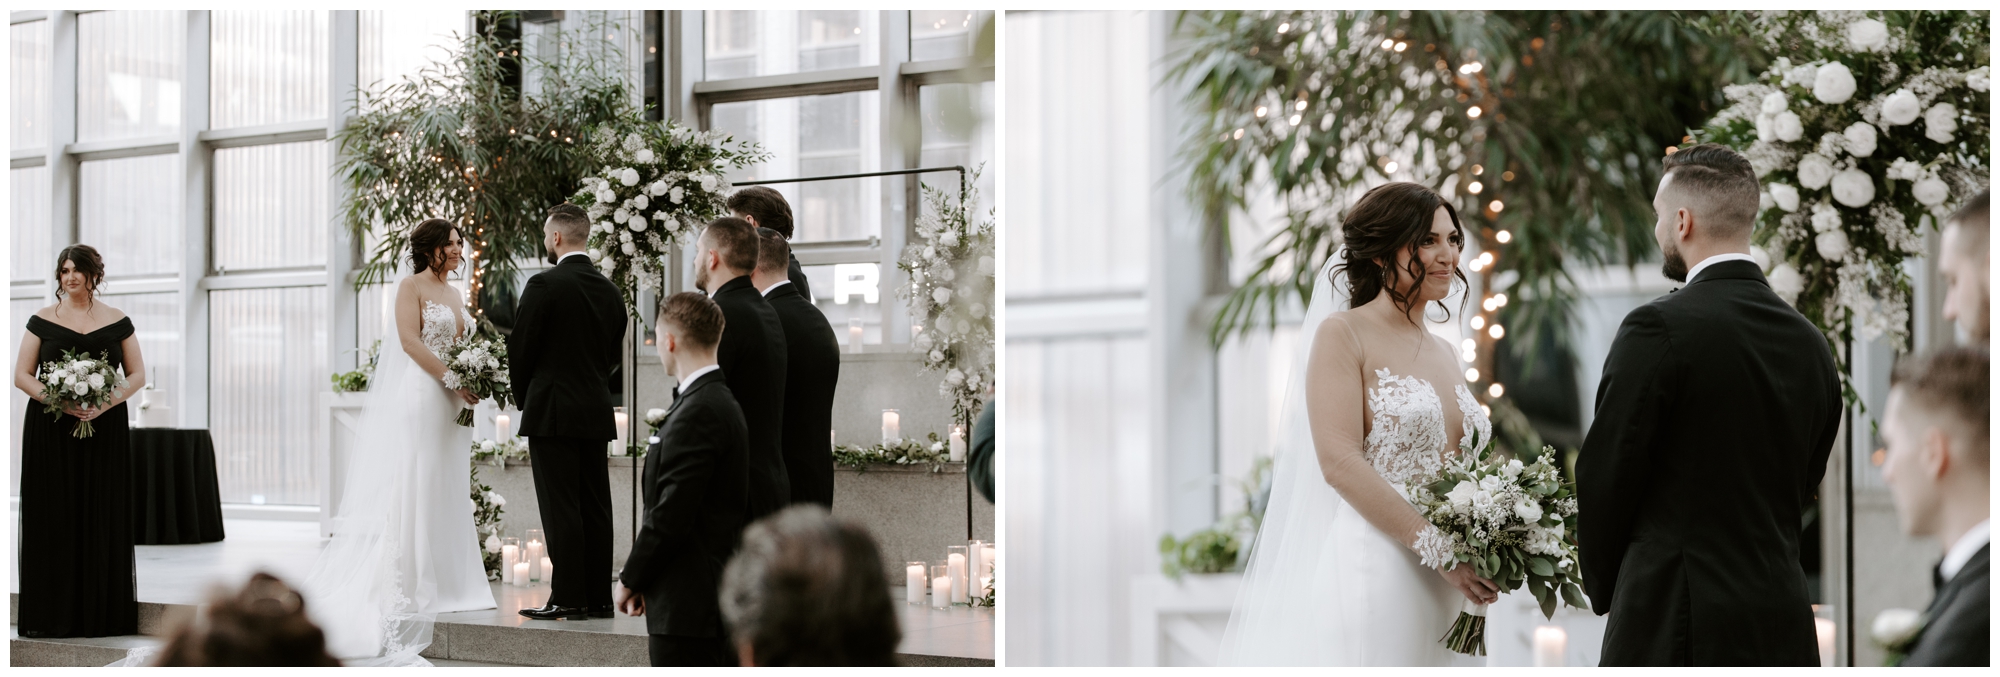 PPG Wintergarden Wedding photographed by Mariah Treiber Photography